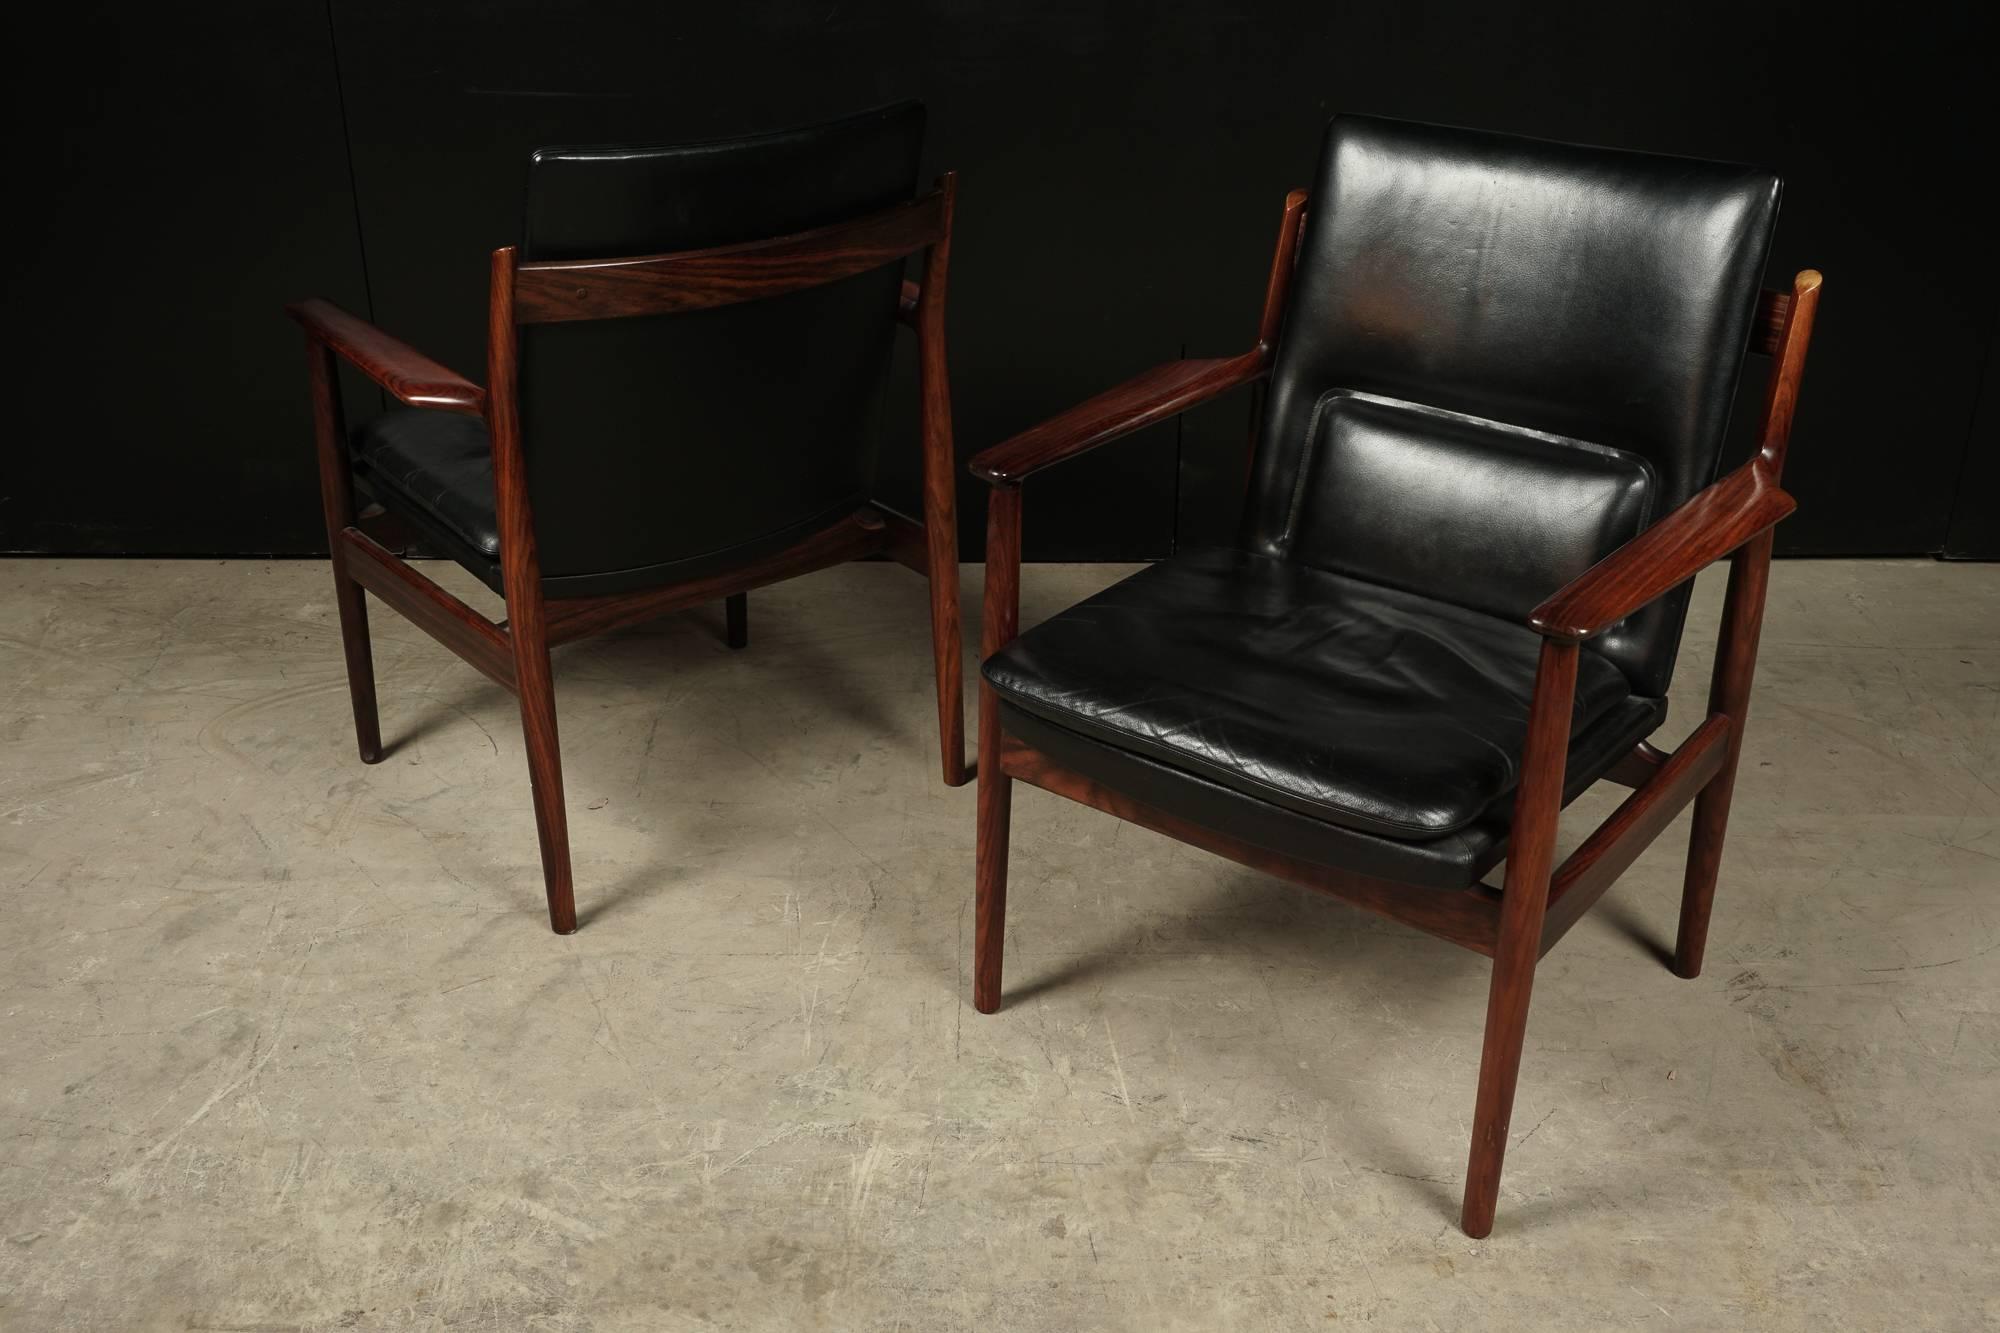 Mid-20th Century Pair of Lounge Chairs From Denmark, Designed by Arne Vodder, circa 1960